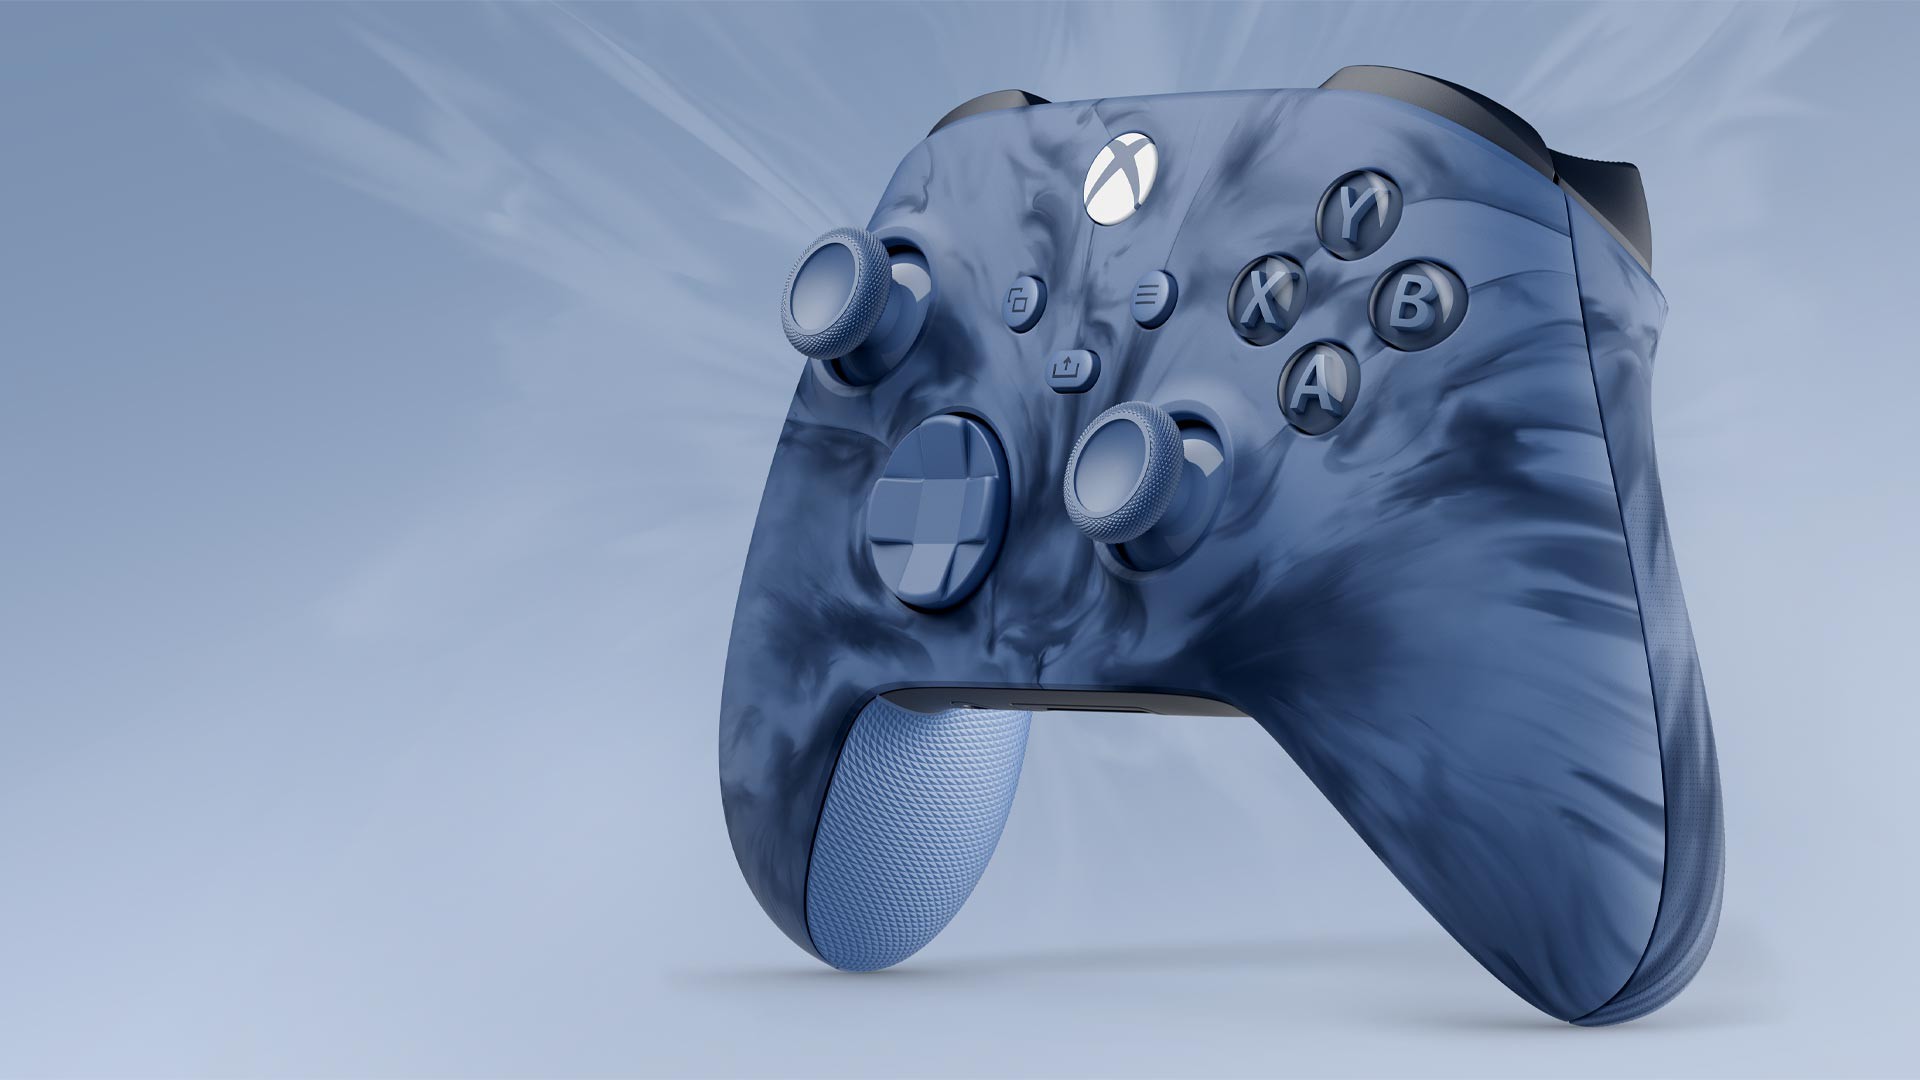 Vaporise Your Competition With The Stormcloud Vapor Special Edition Controller